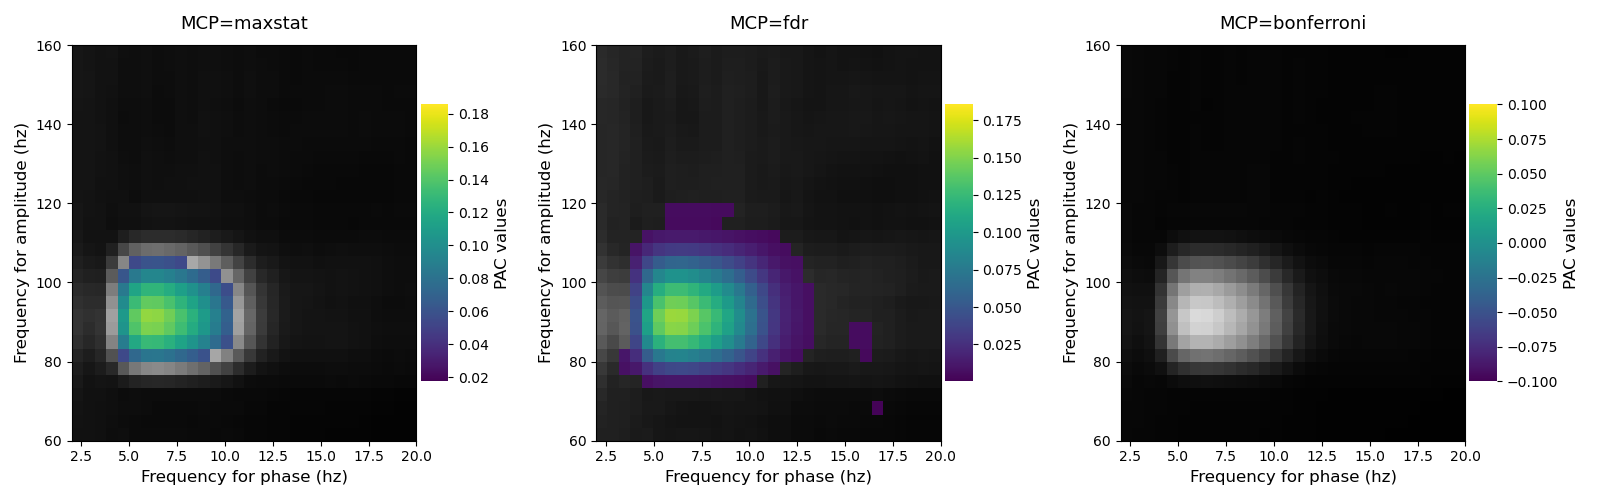 ../../_images/sphx_glr_plot_compare_mcp_001.png